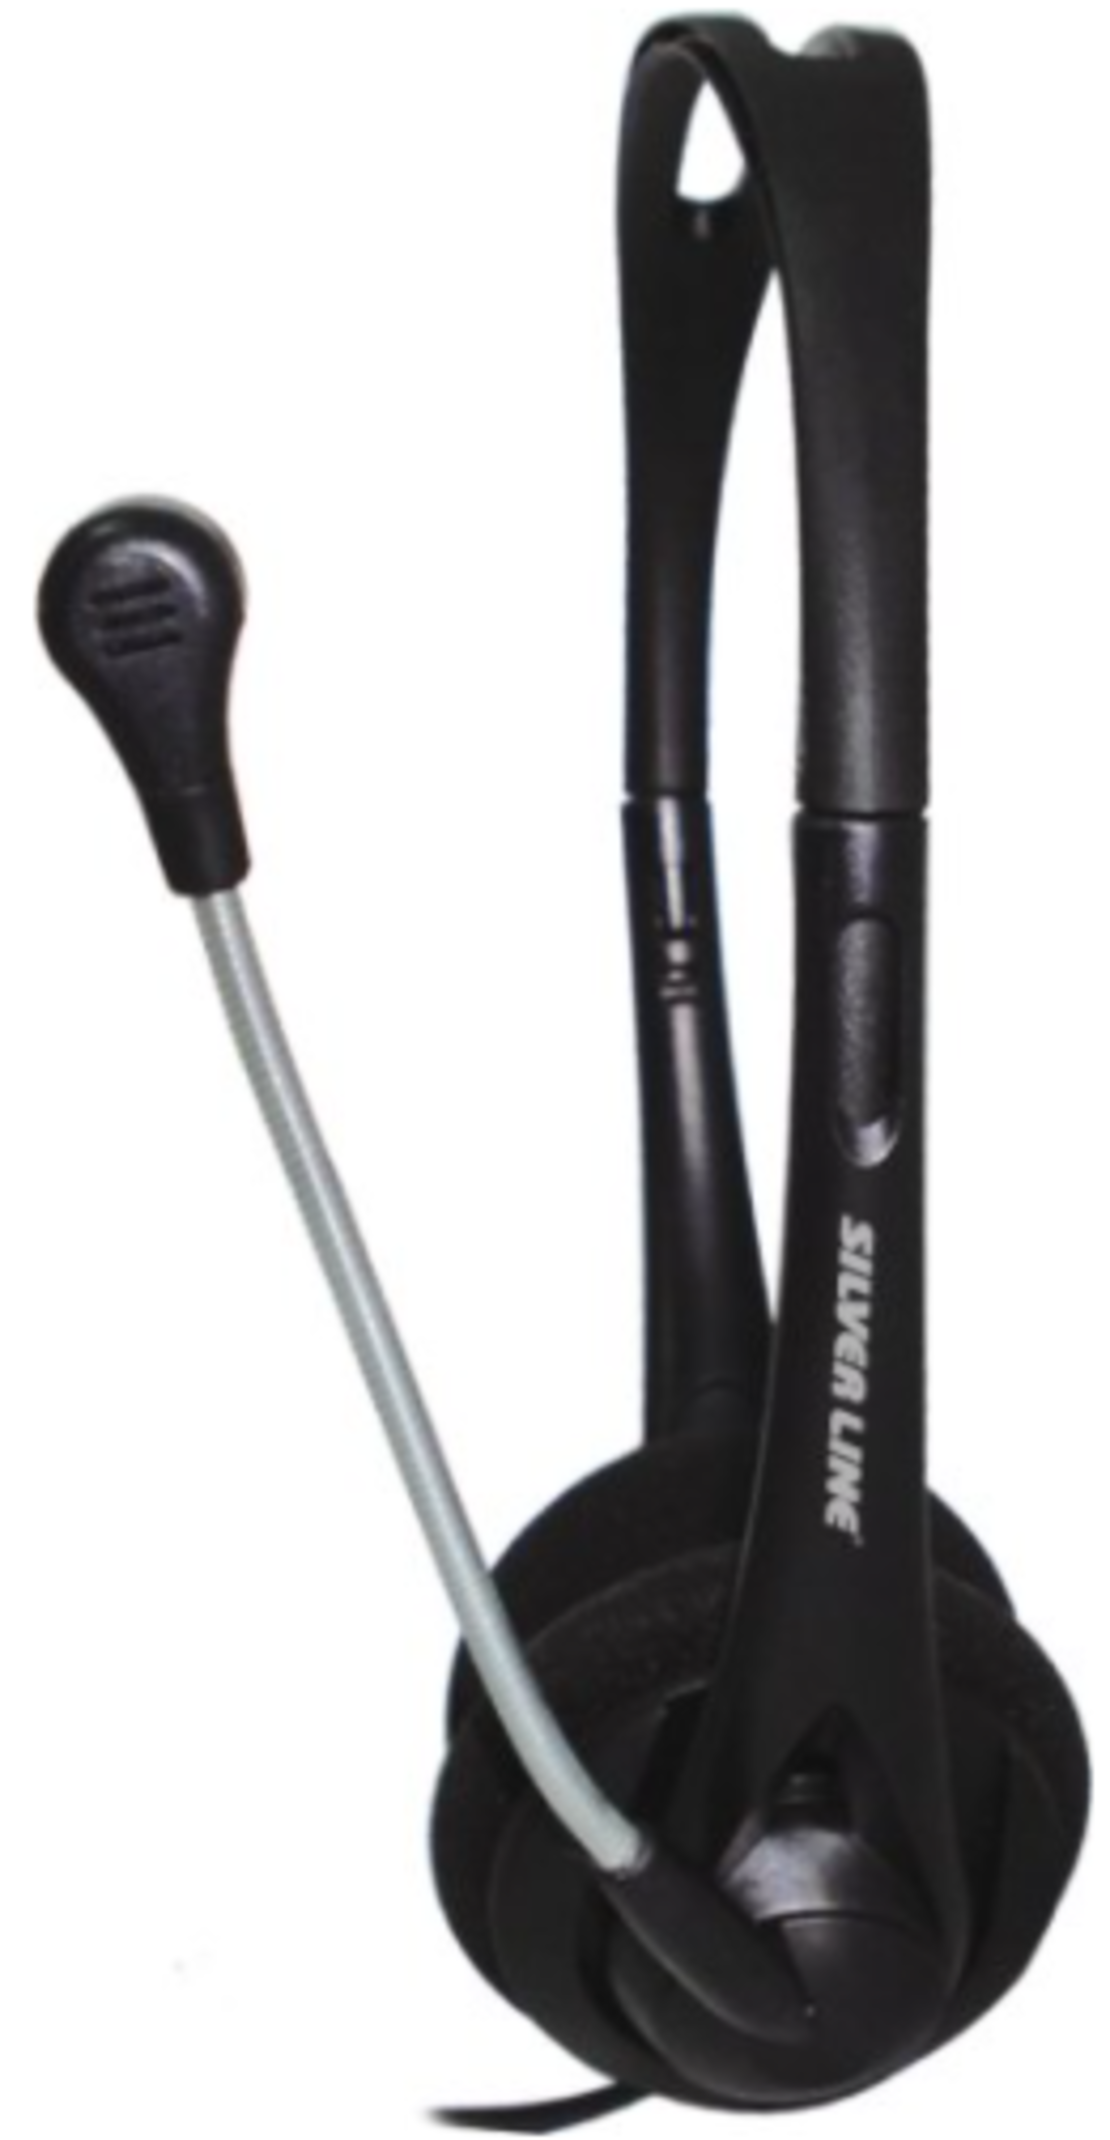 HS12V bow headphones with microphone from SILVER LINE